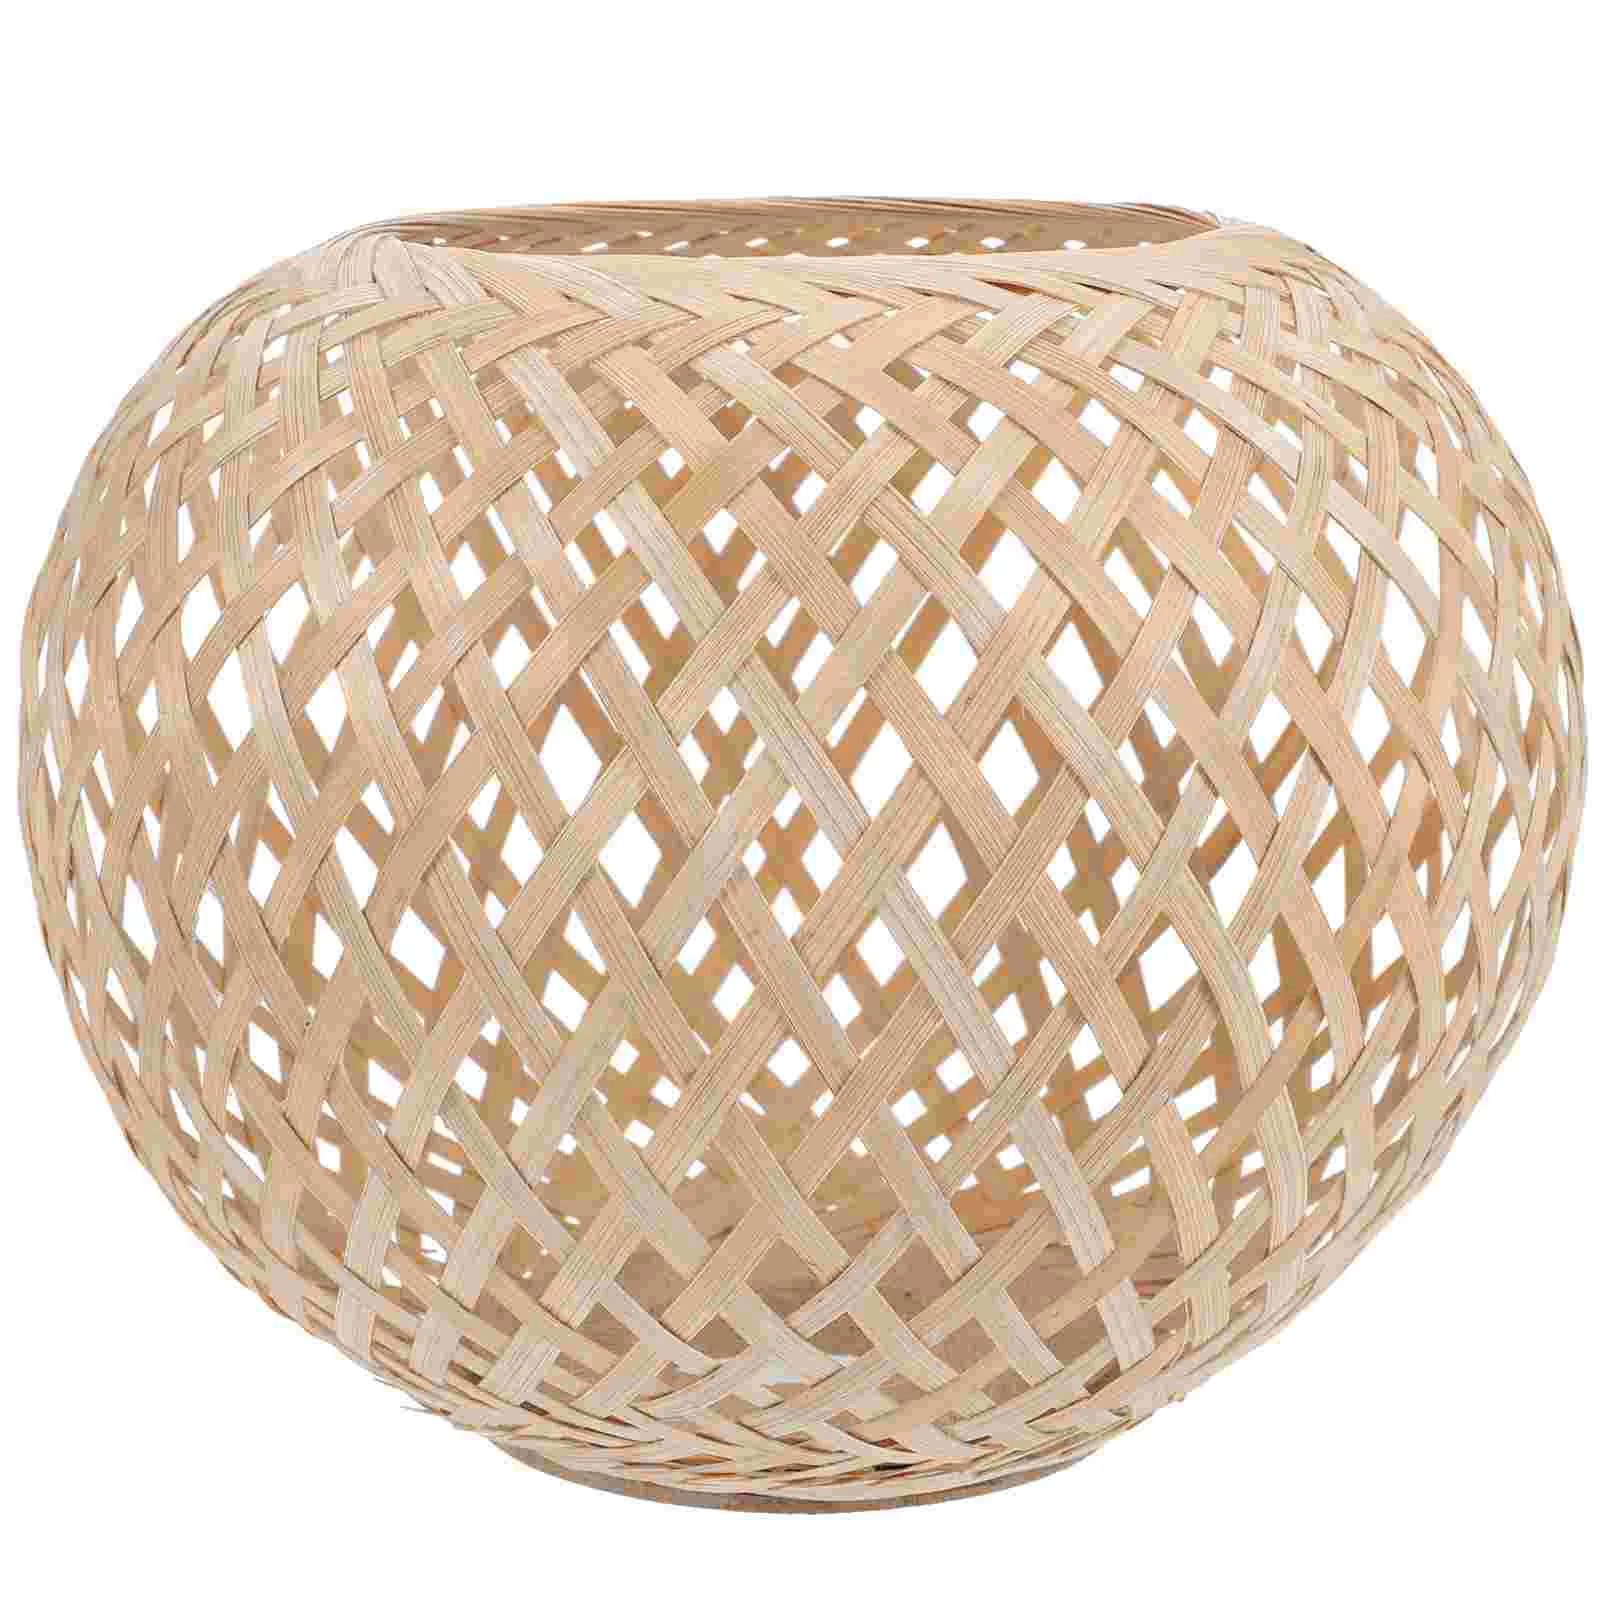 

Lamp Shade Light Shades Pendant Bamboo Woven Cover Lampshade Ceiling Hanging Rattan Wicker Rustic Chandelier Lampshades